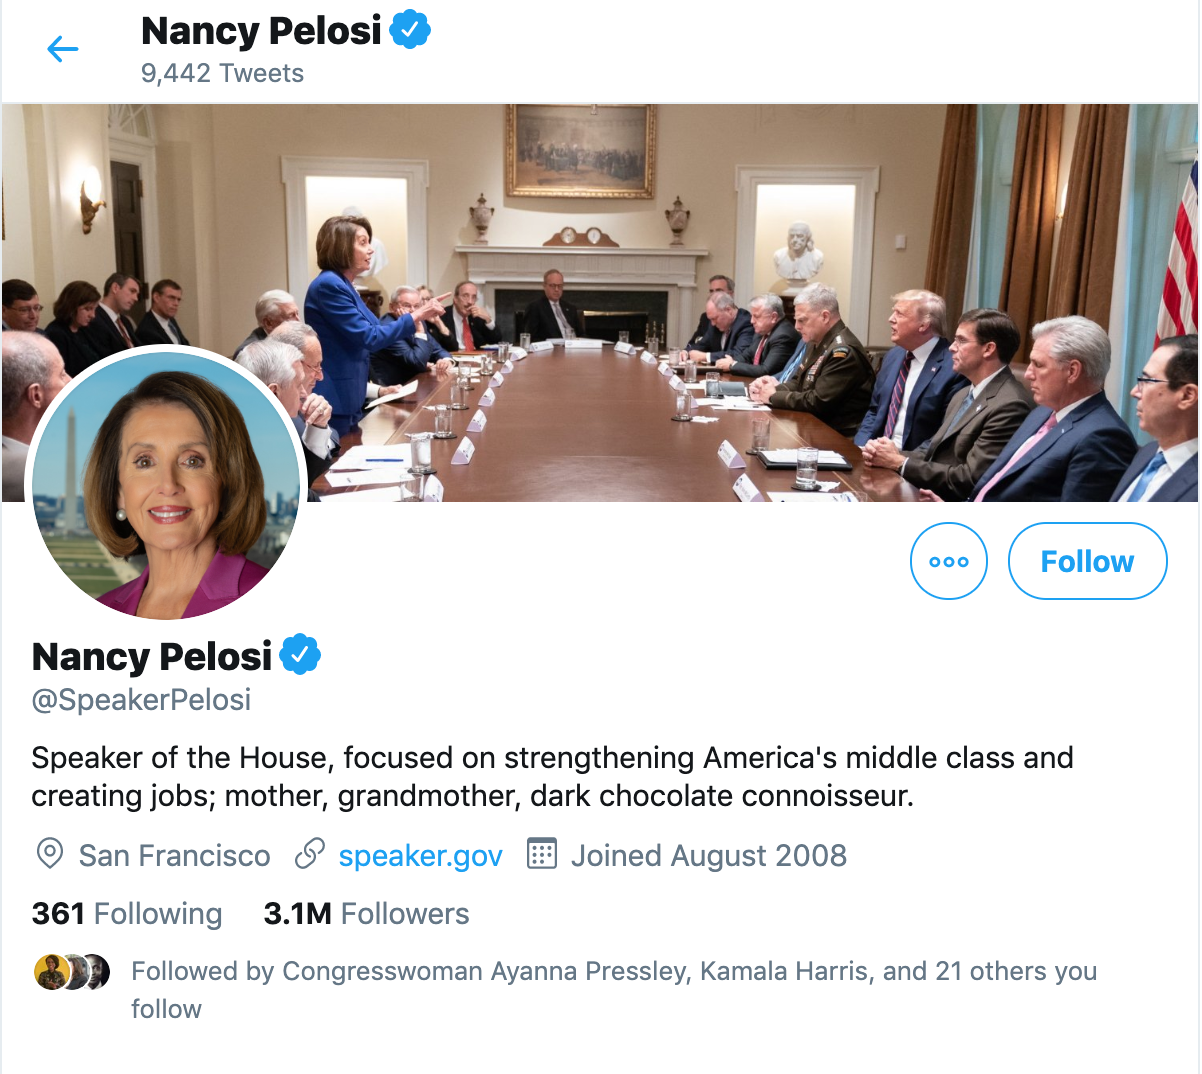 Nancy Pelosi Comes Out The Victor In Pelosi-Trump Twitter Matchup